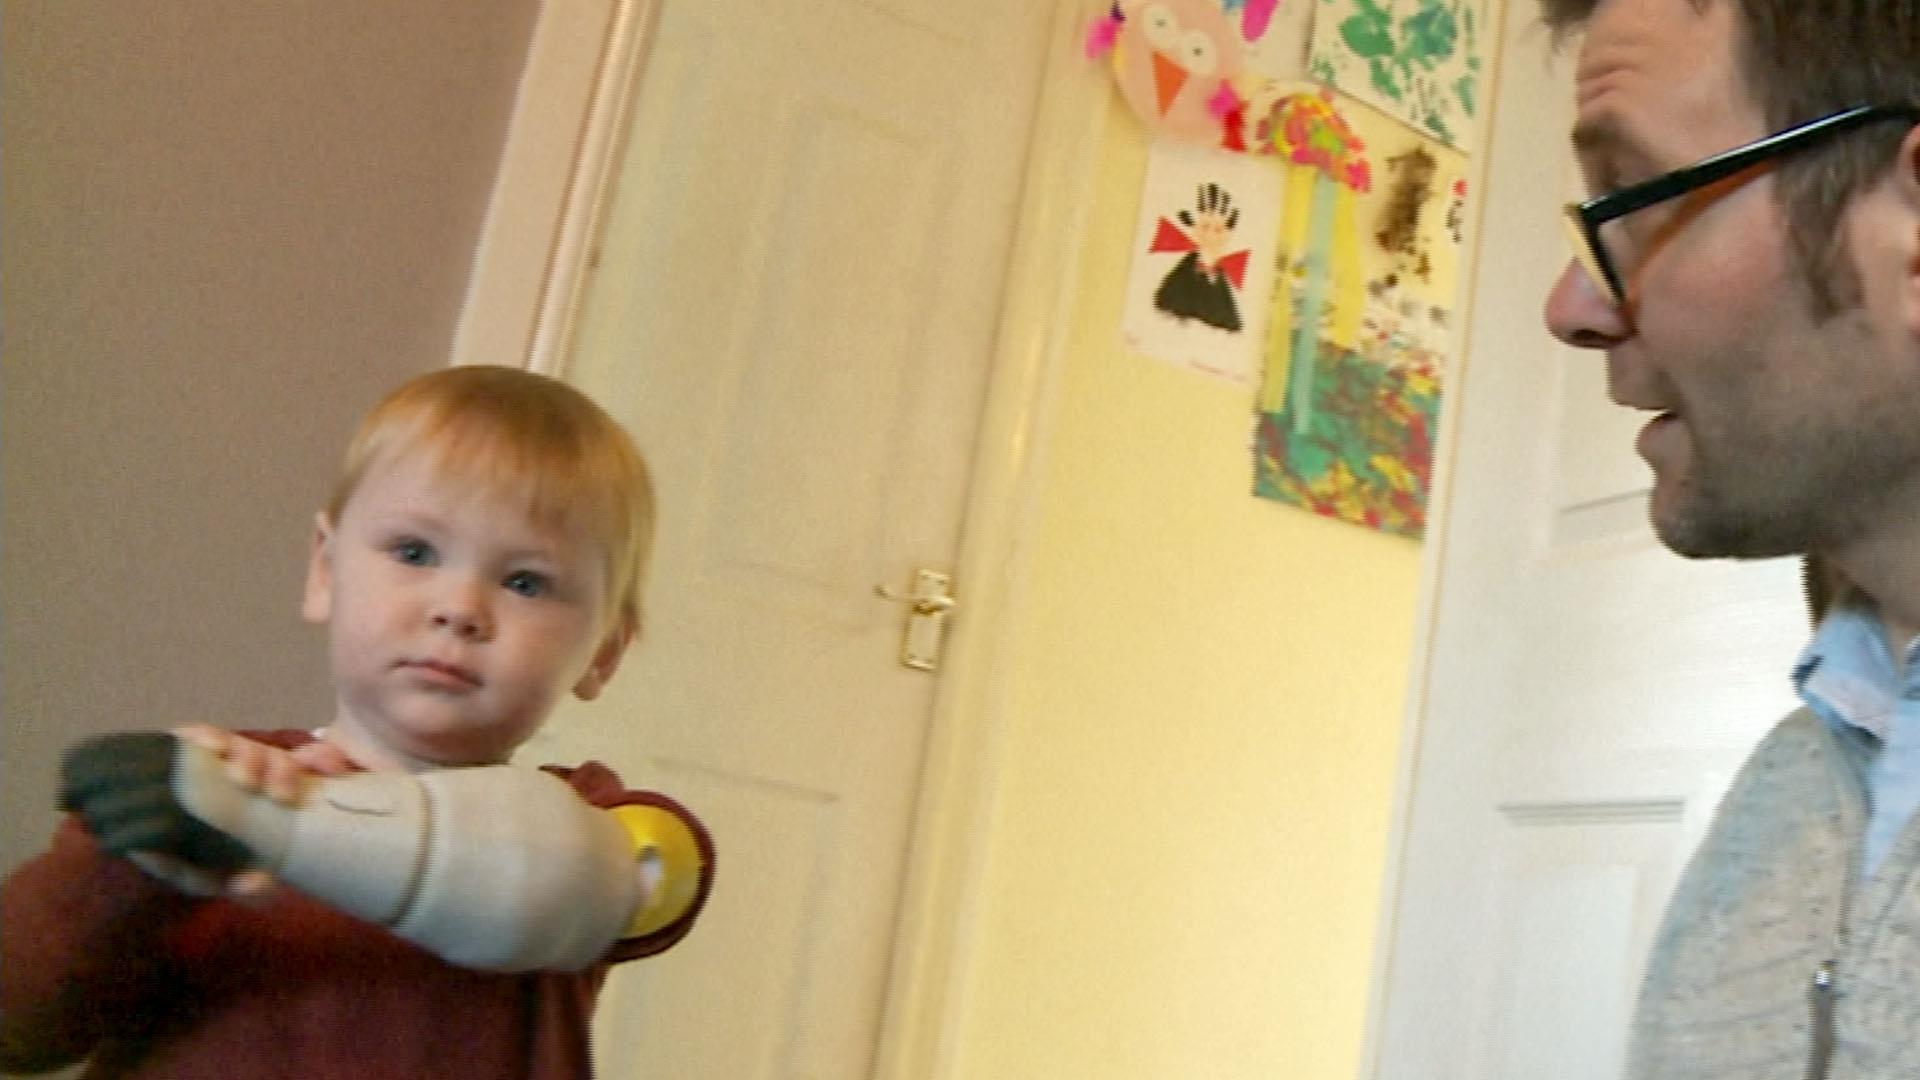 Dad Makes Bionic Arm for Amputee Son, With 3D Printer